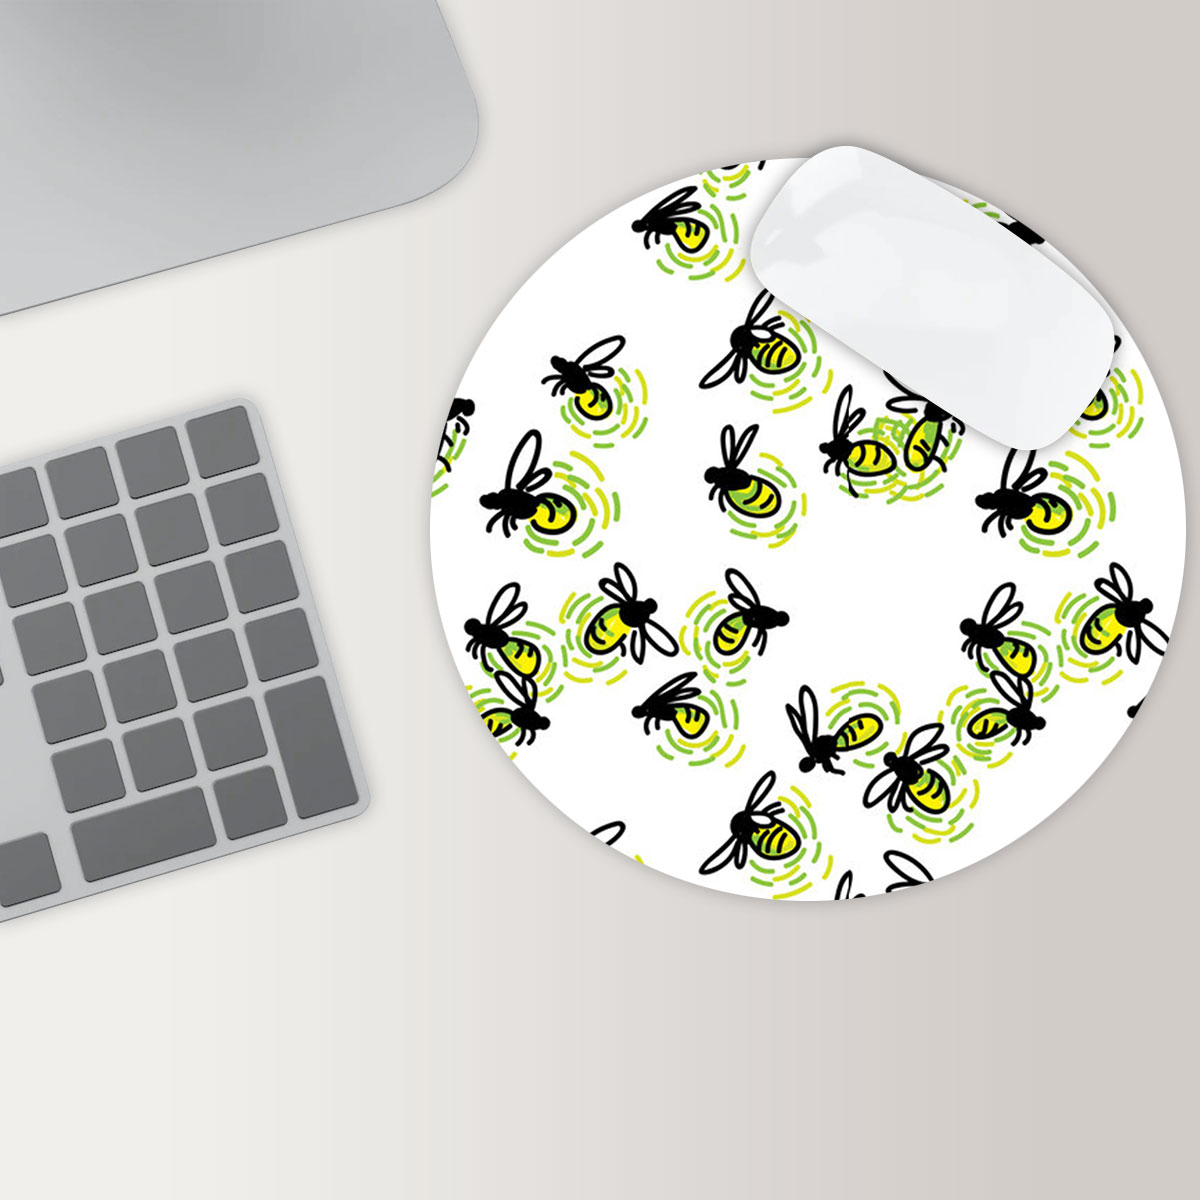 Glowing Fireflies Round Mouse Pad